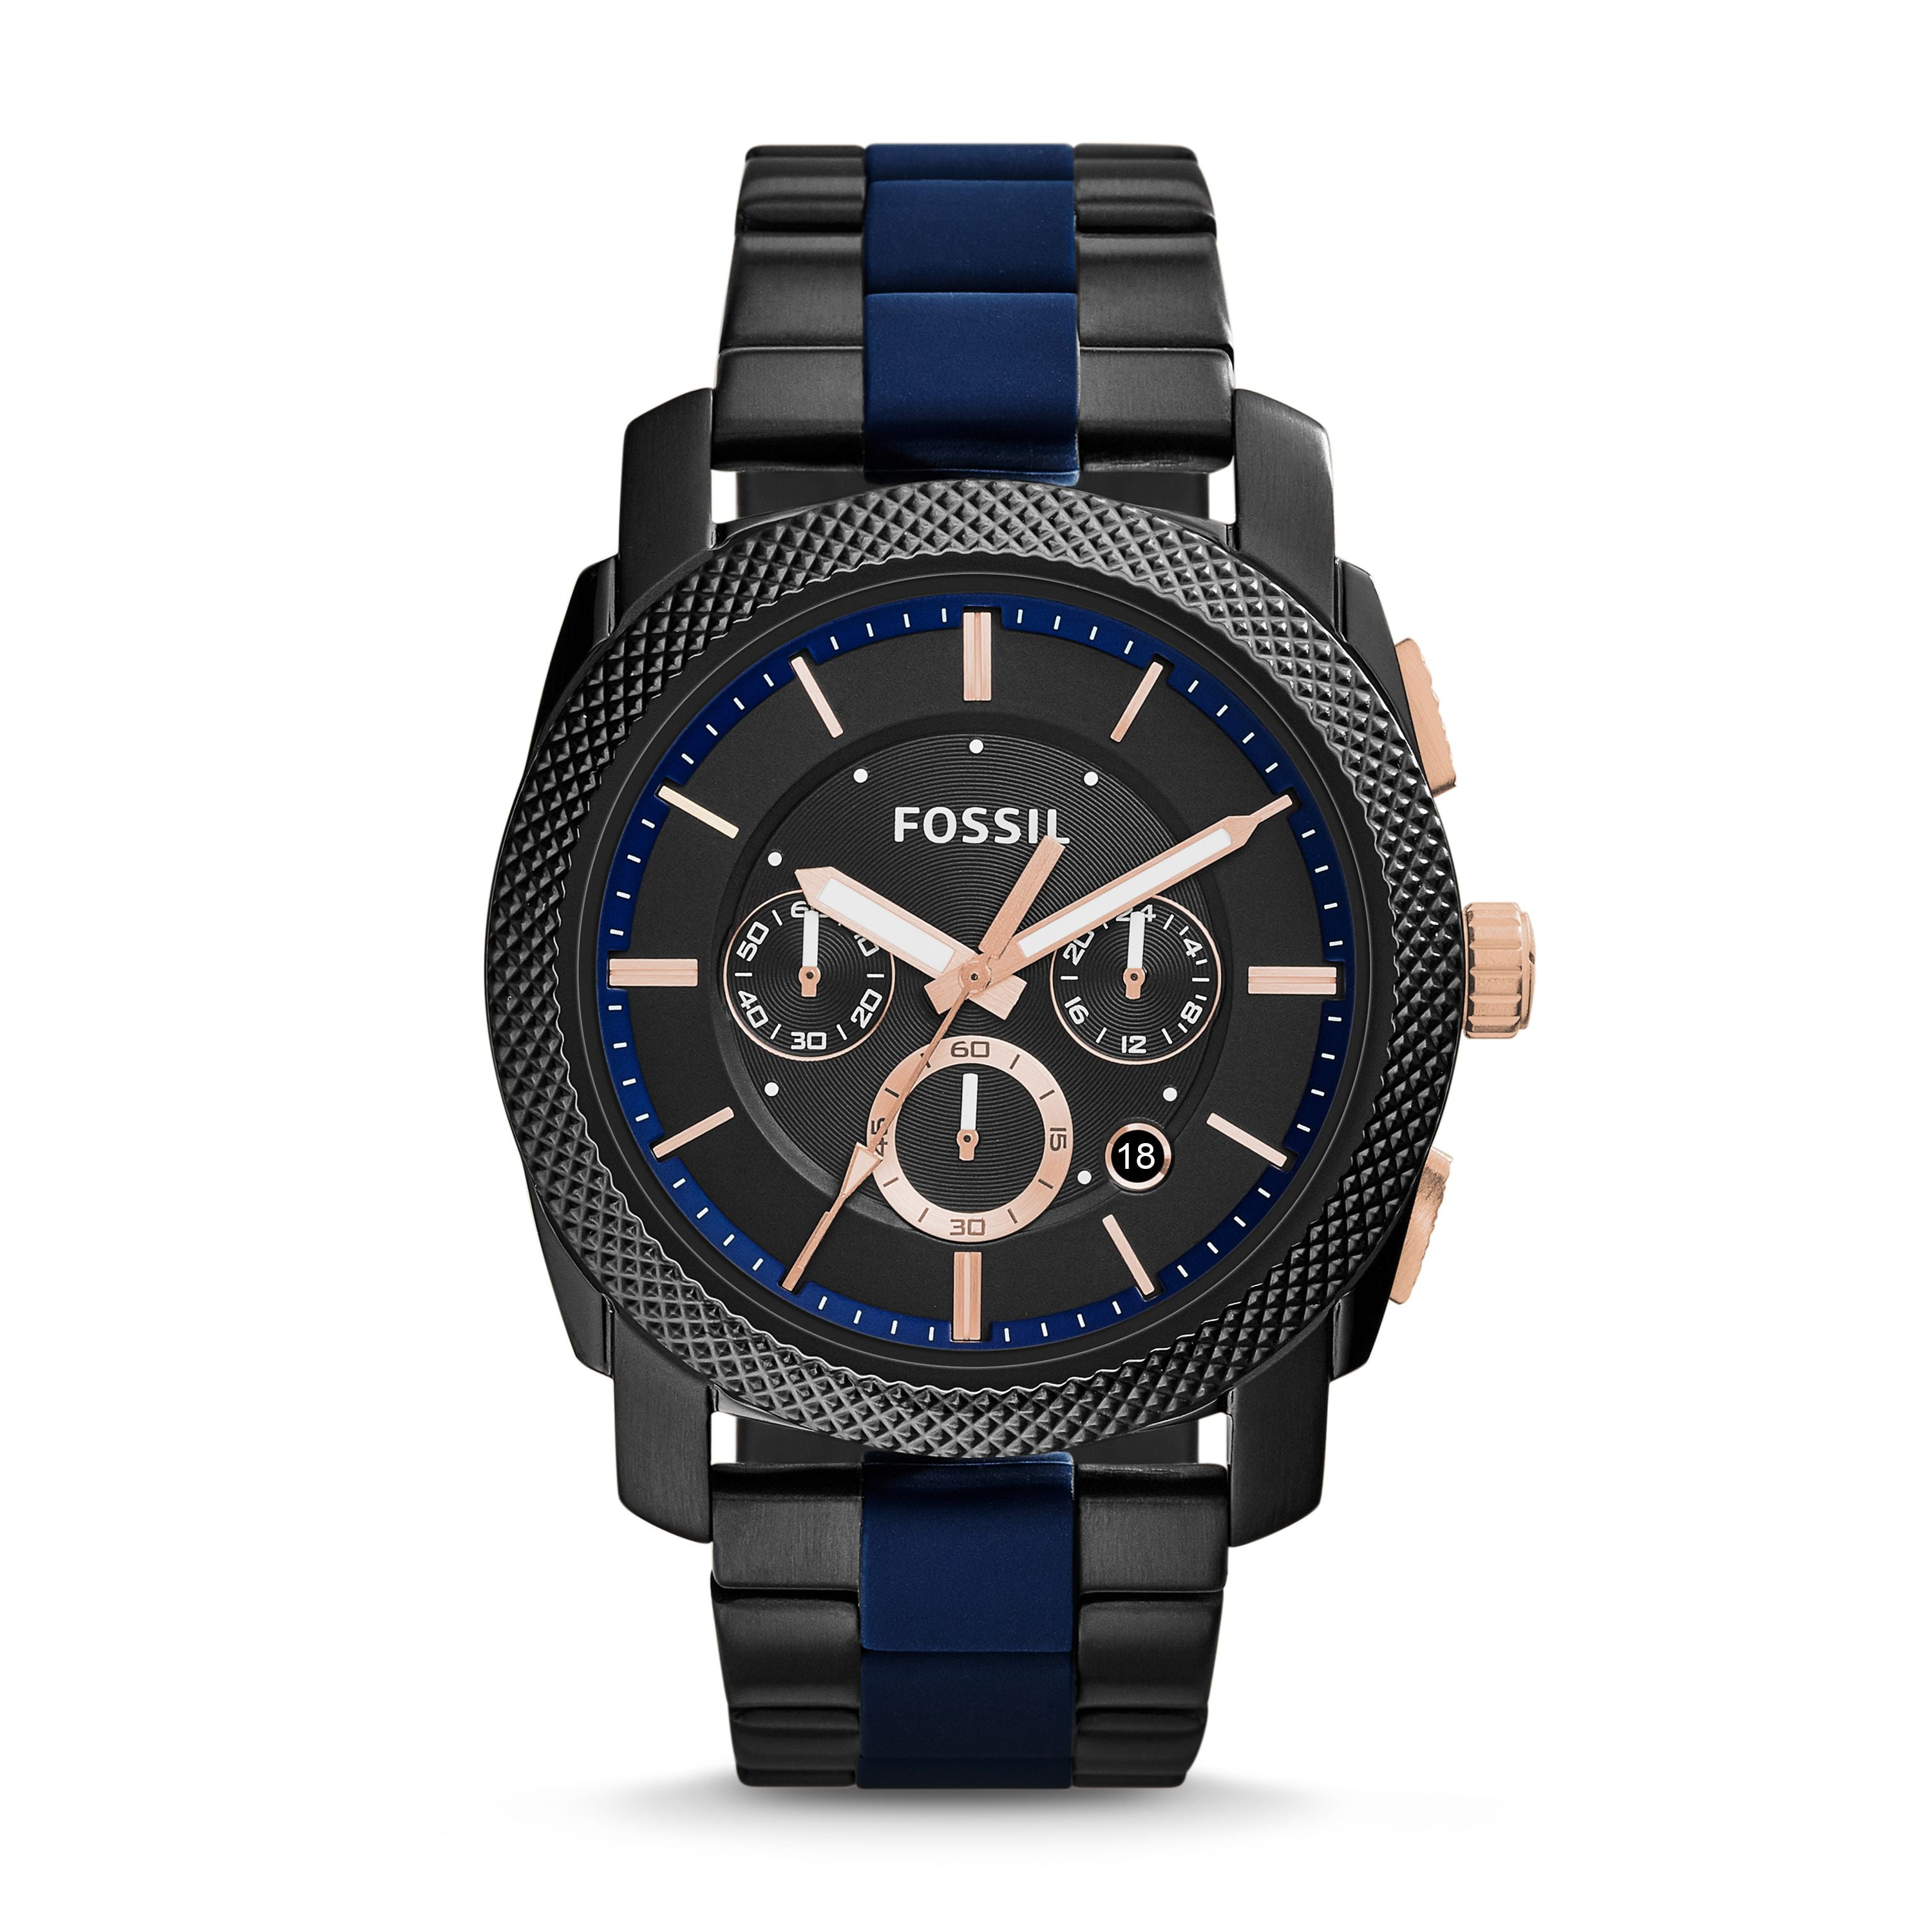 Fossil Men's Machine Black Stainless Steel Chronograph Watch (Style:  FS4552) 